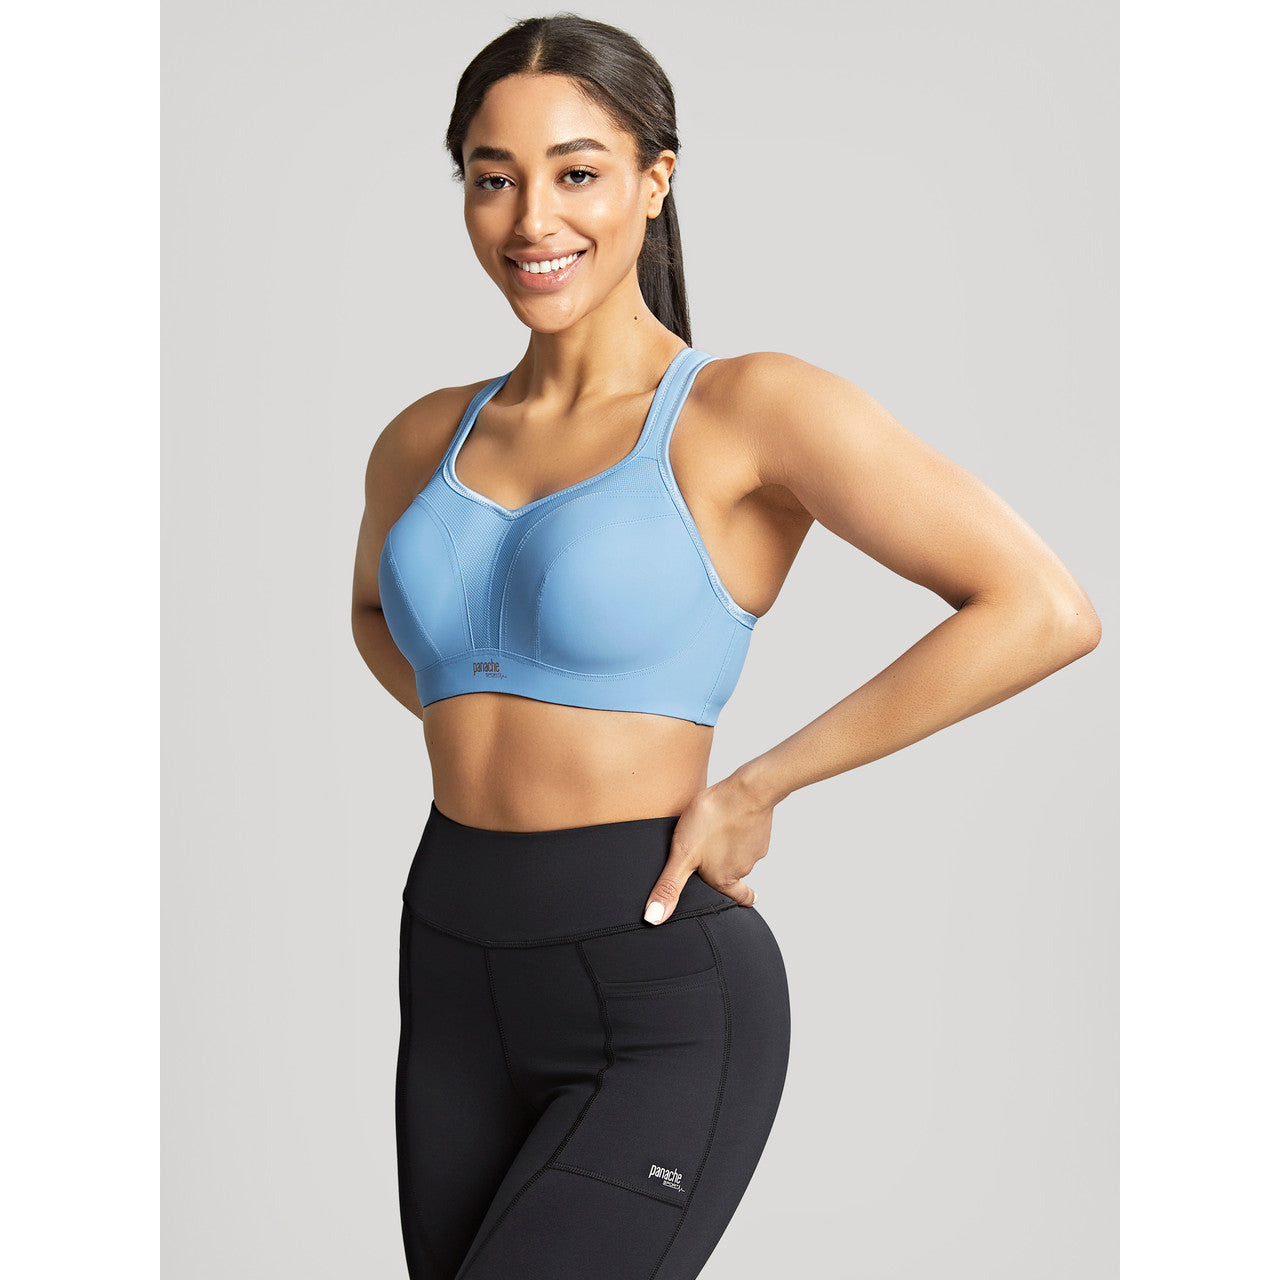 Experience ultimate comfort and support during workouts with this Panache  high impact wired sports bra💪 Available in size 30-40 E-J cu